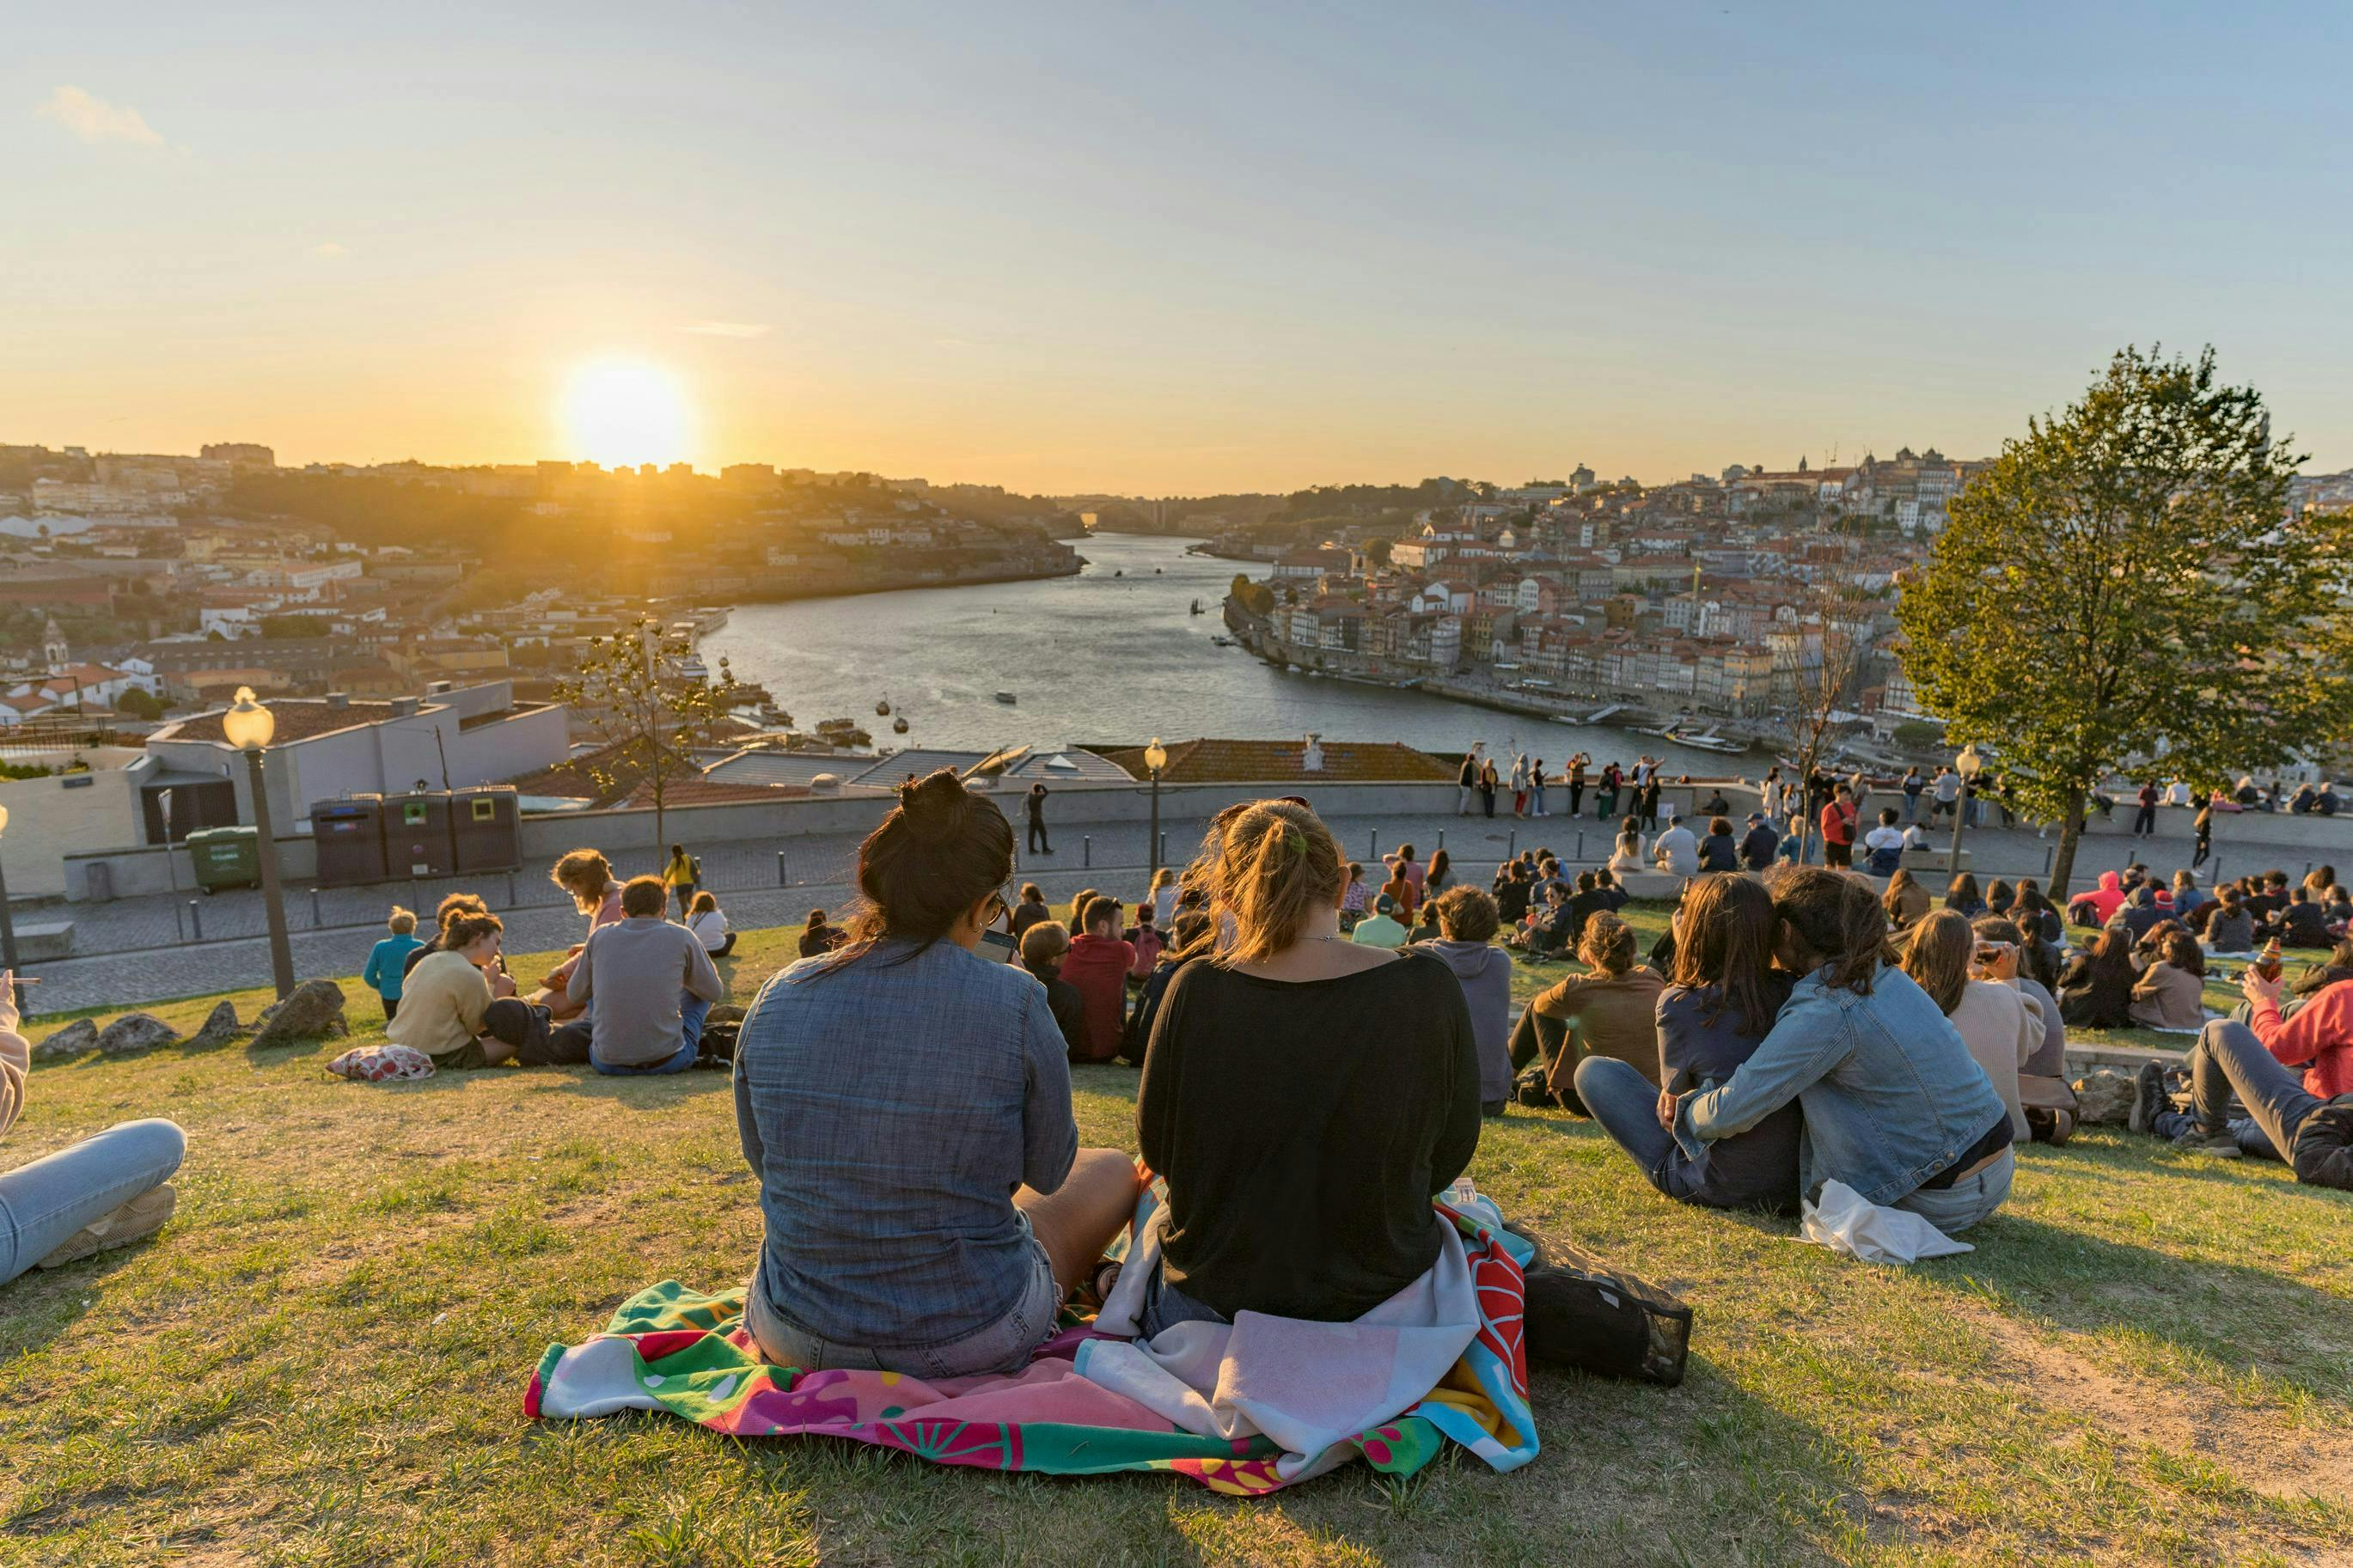 People sitting on a hill overlooking a river watching the sun set